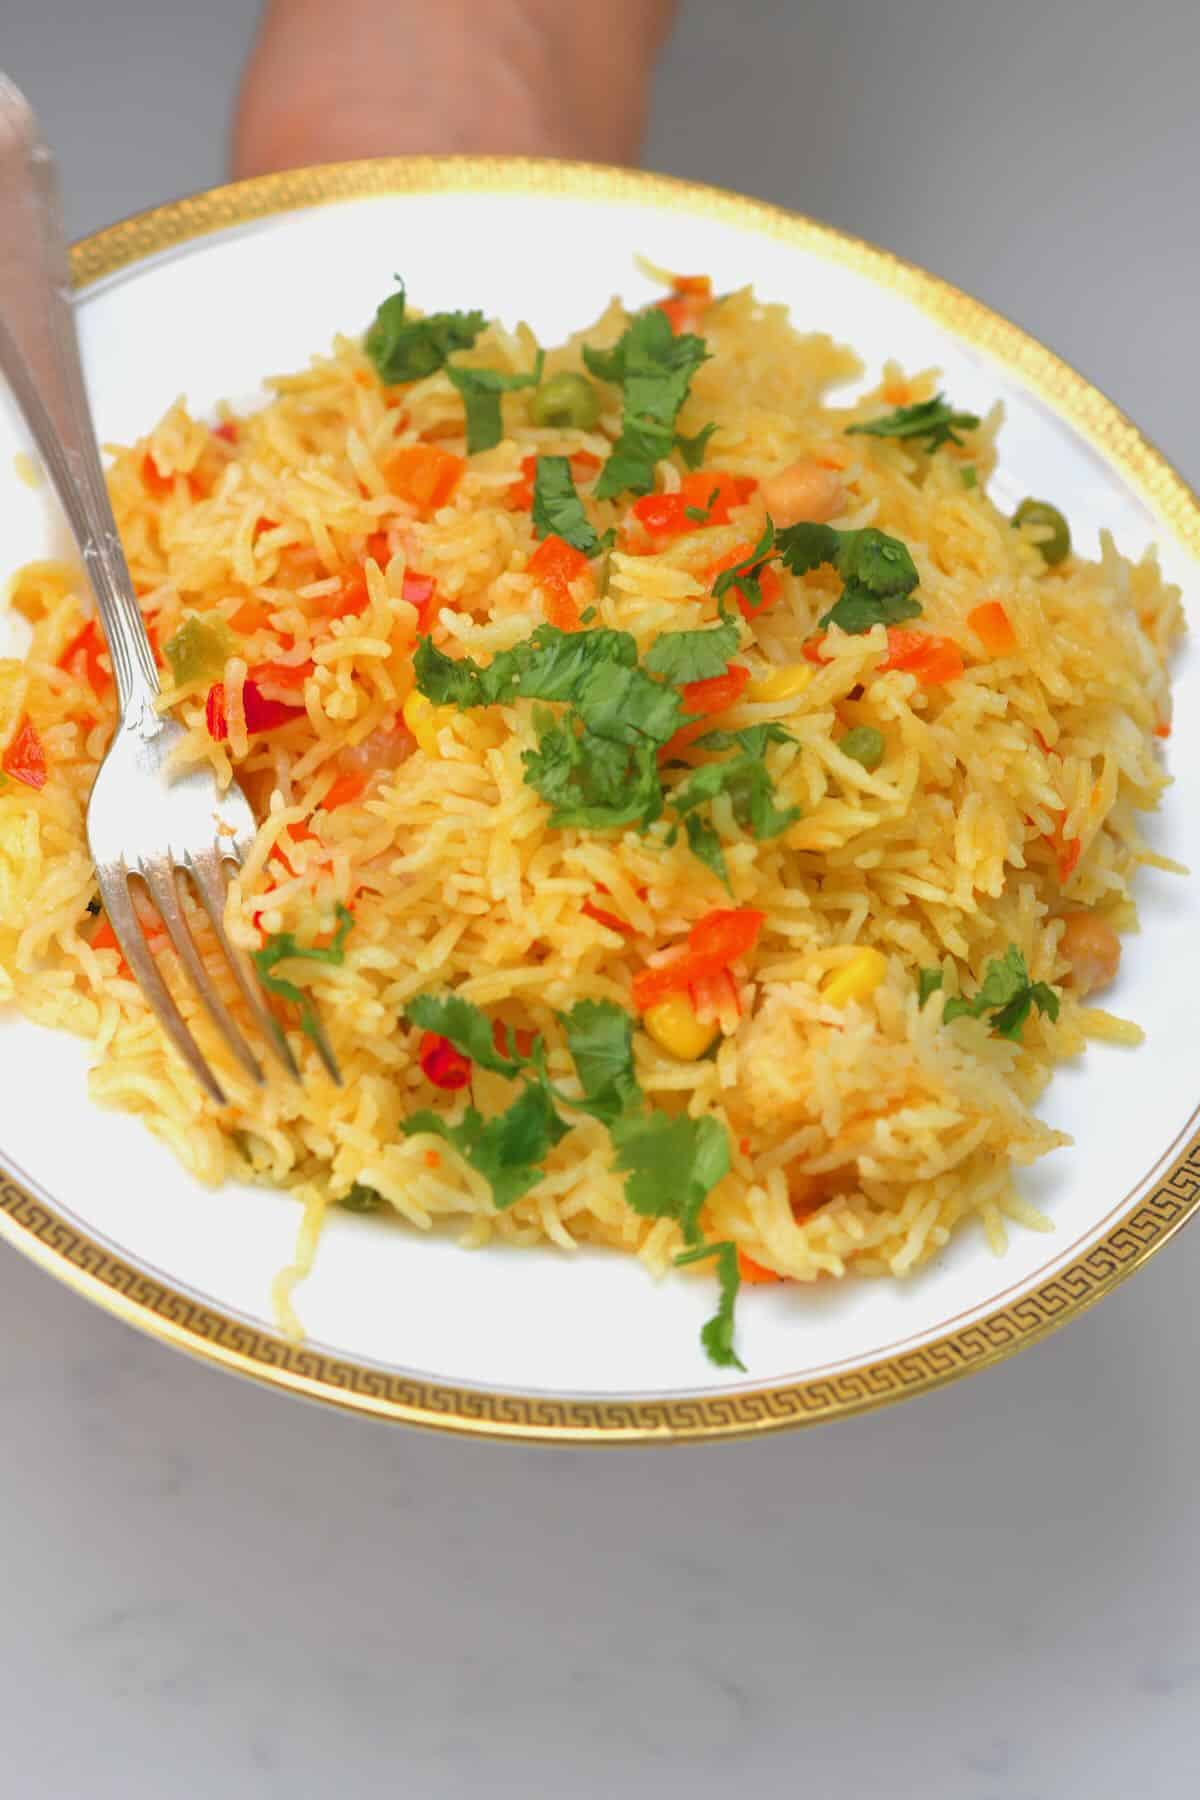 A serving of vegetable rice